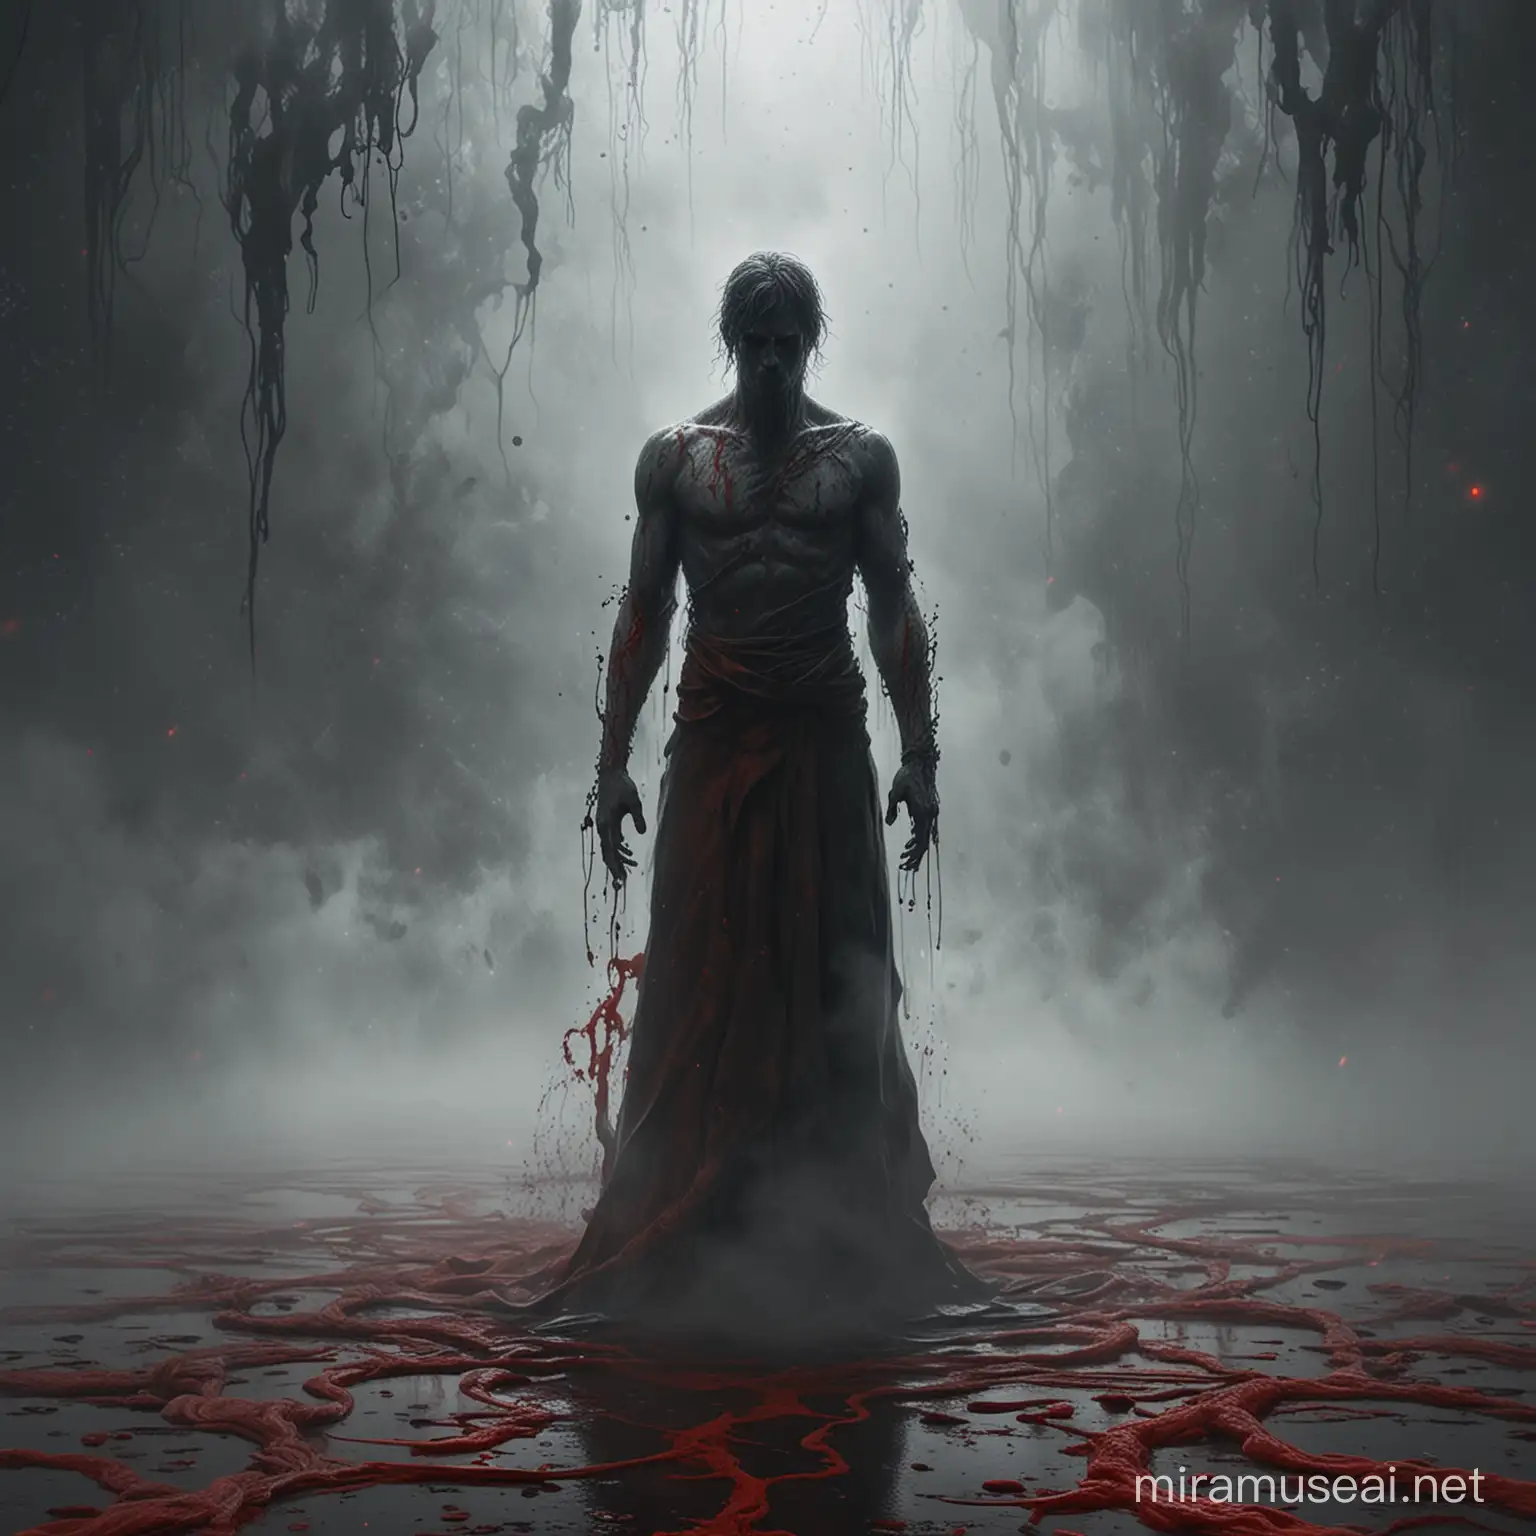 a solitary scarred figure standing amidst swirling mist and blood, representing the protagonist's isolation and inner turmoil.